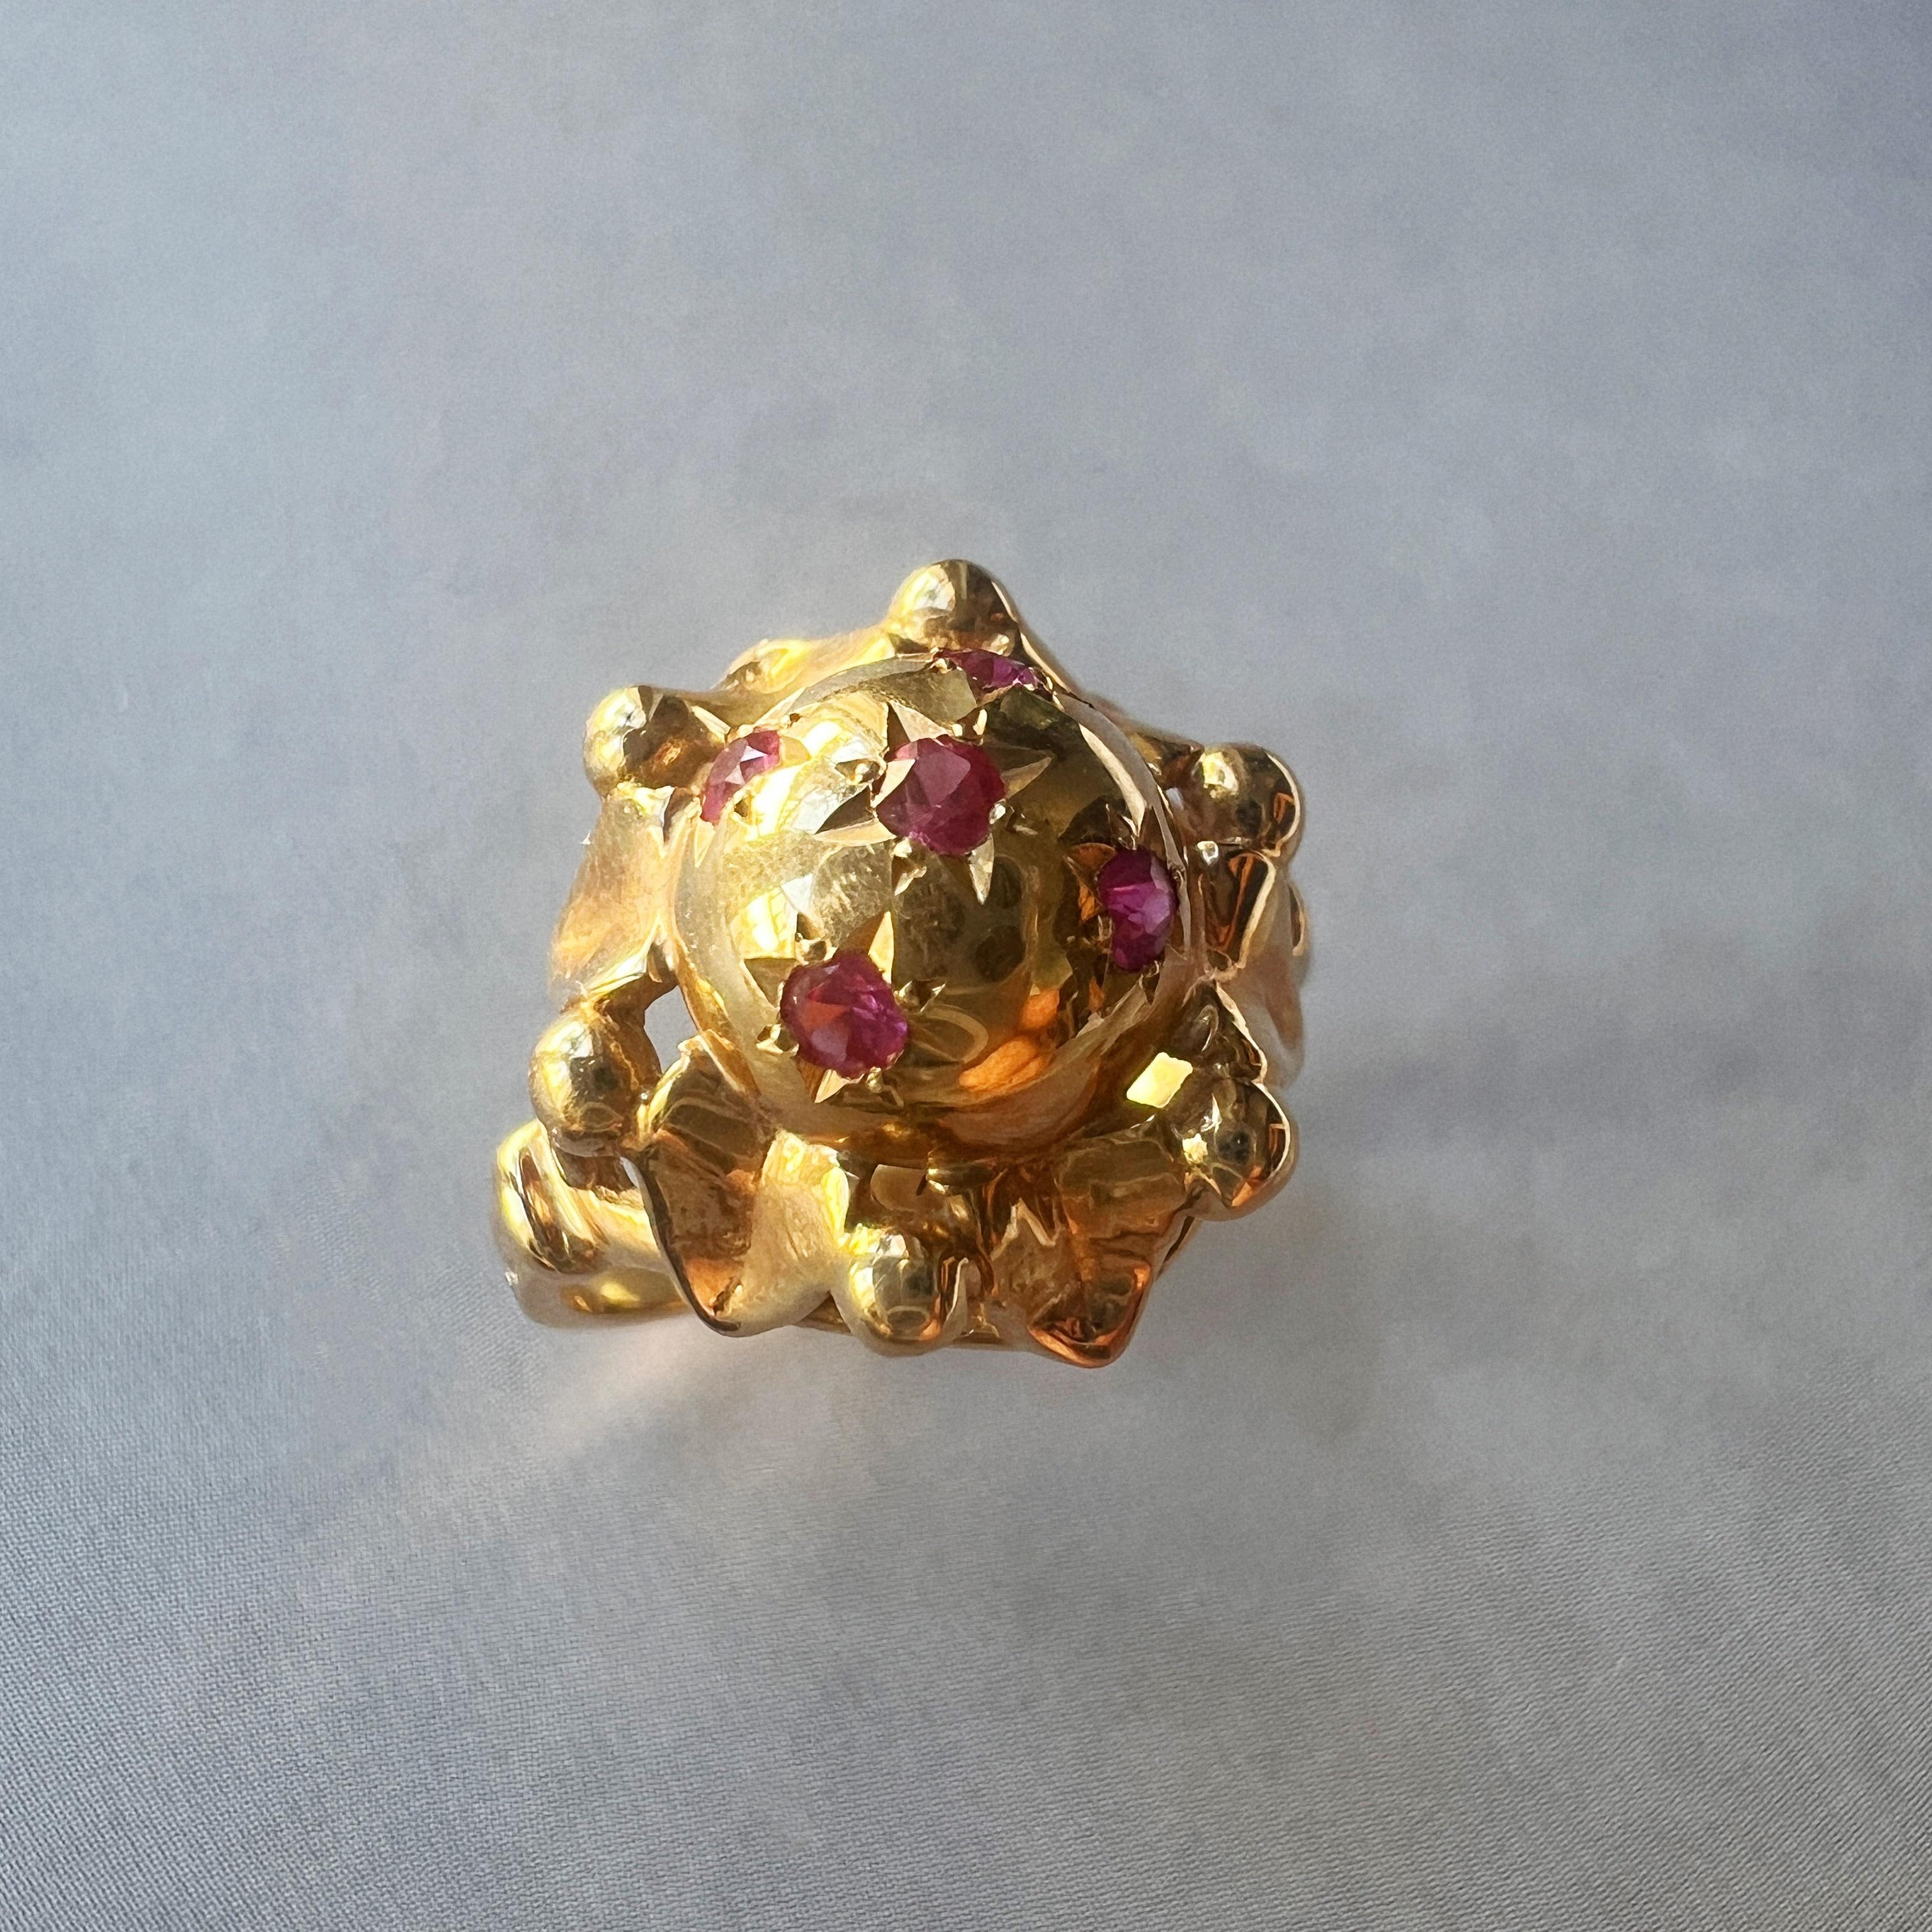 Retro French retro 18K gold star ring, vintage cocktail ring constellation For Sale